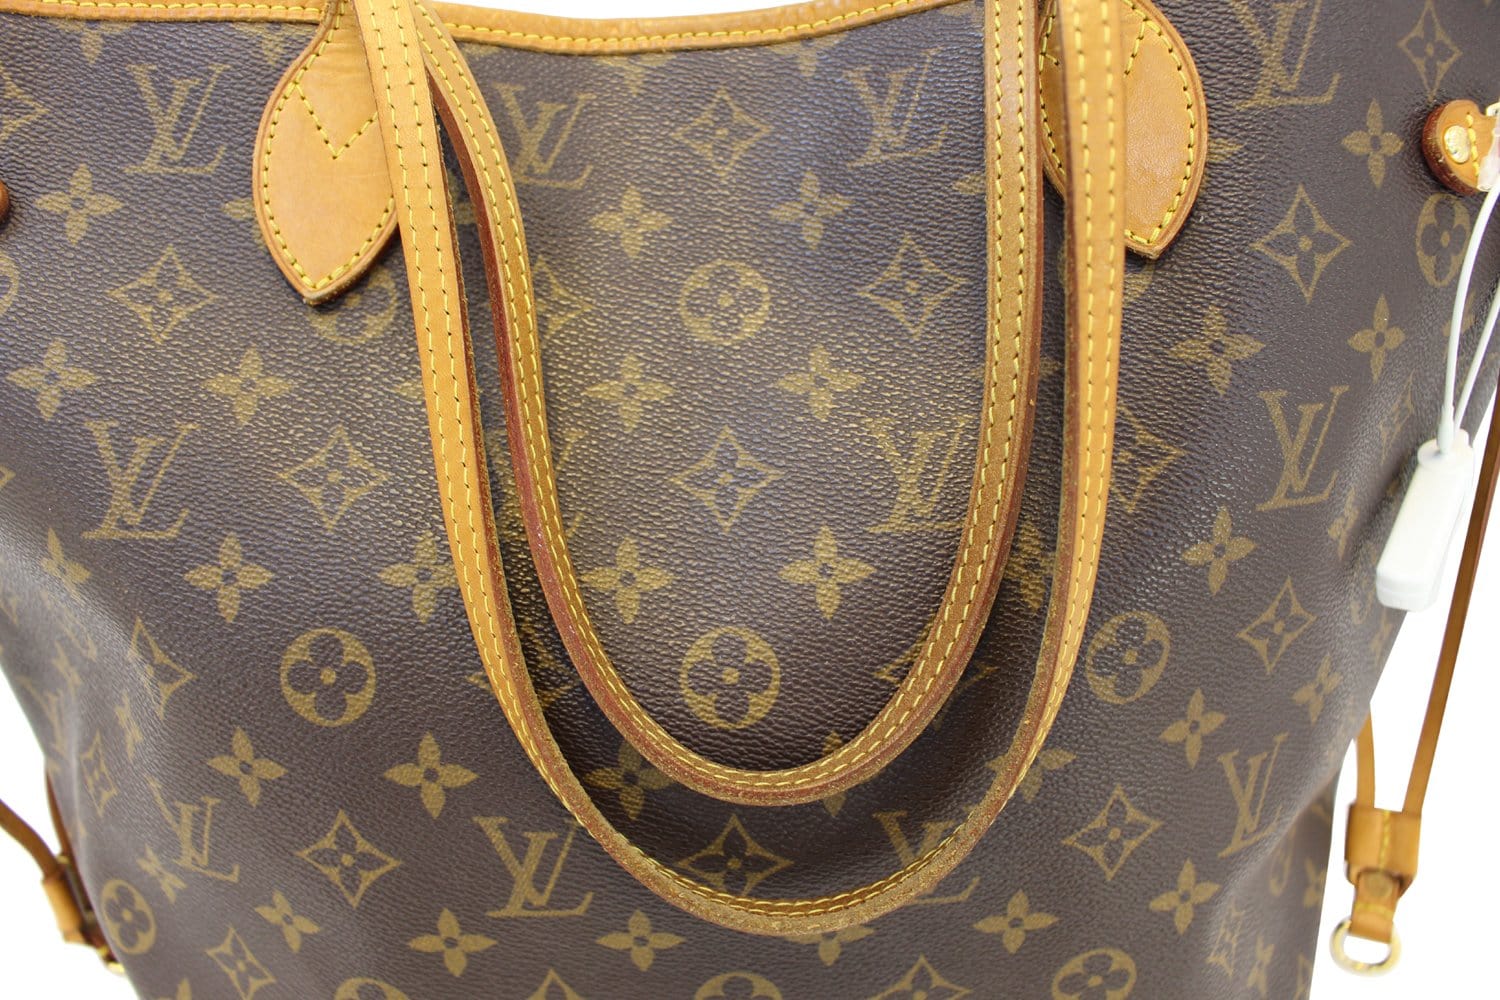 Louis Vuitton Neverfull MM tote bag Multiple colors Leather ref